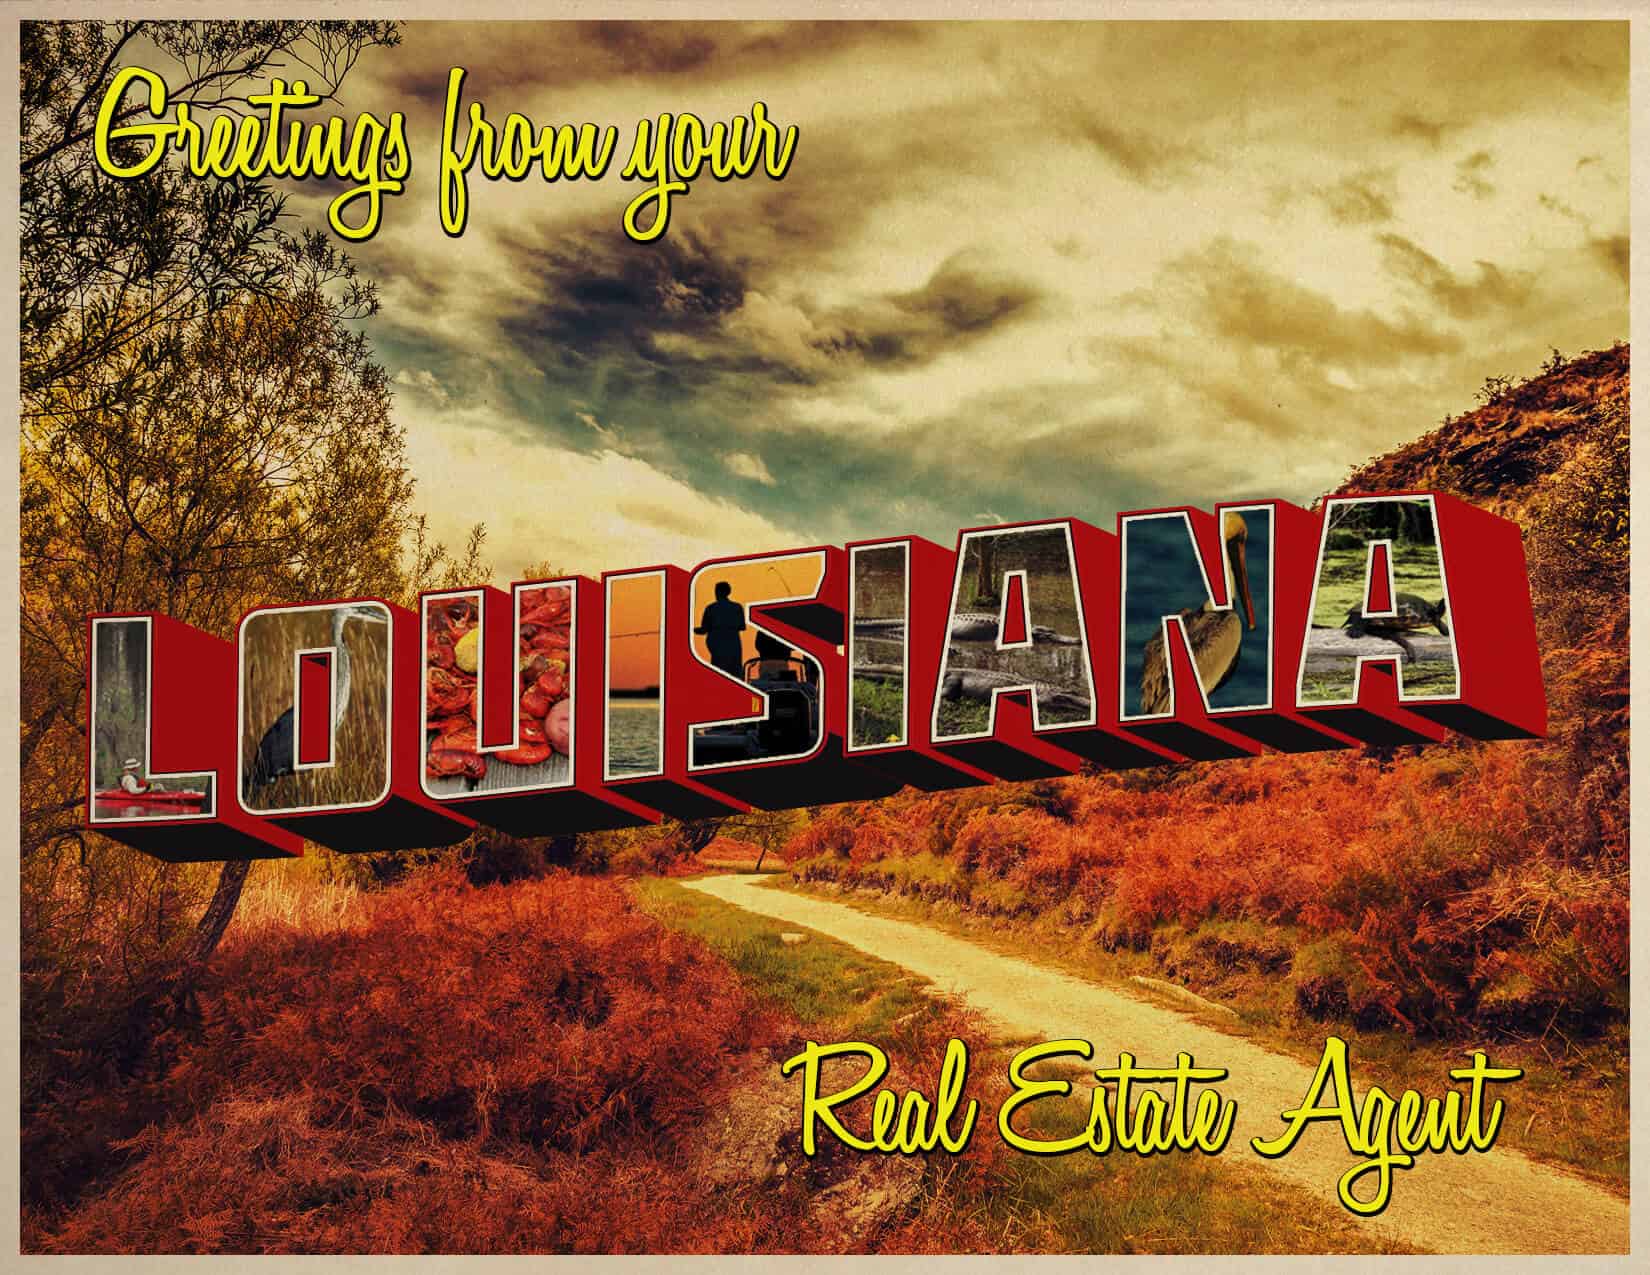 Greetings from your Louisiana Real Estate Agent postcard design